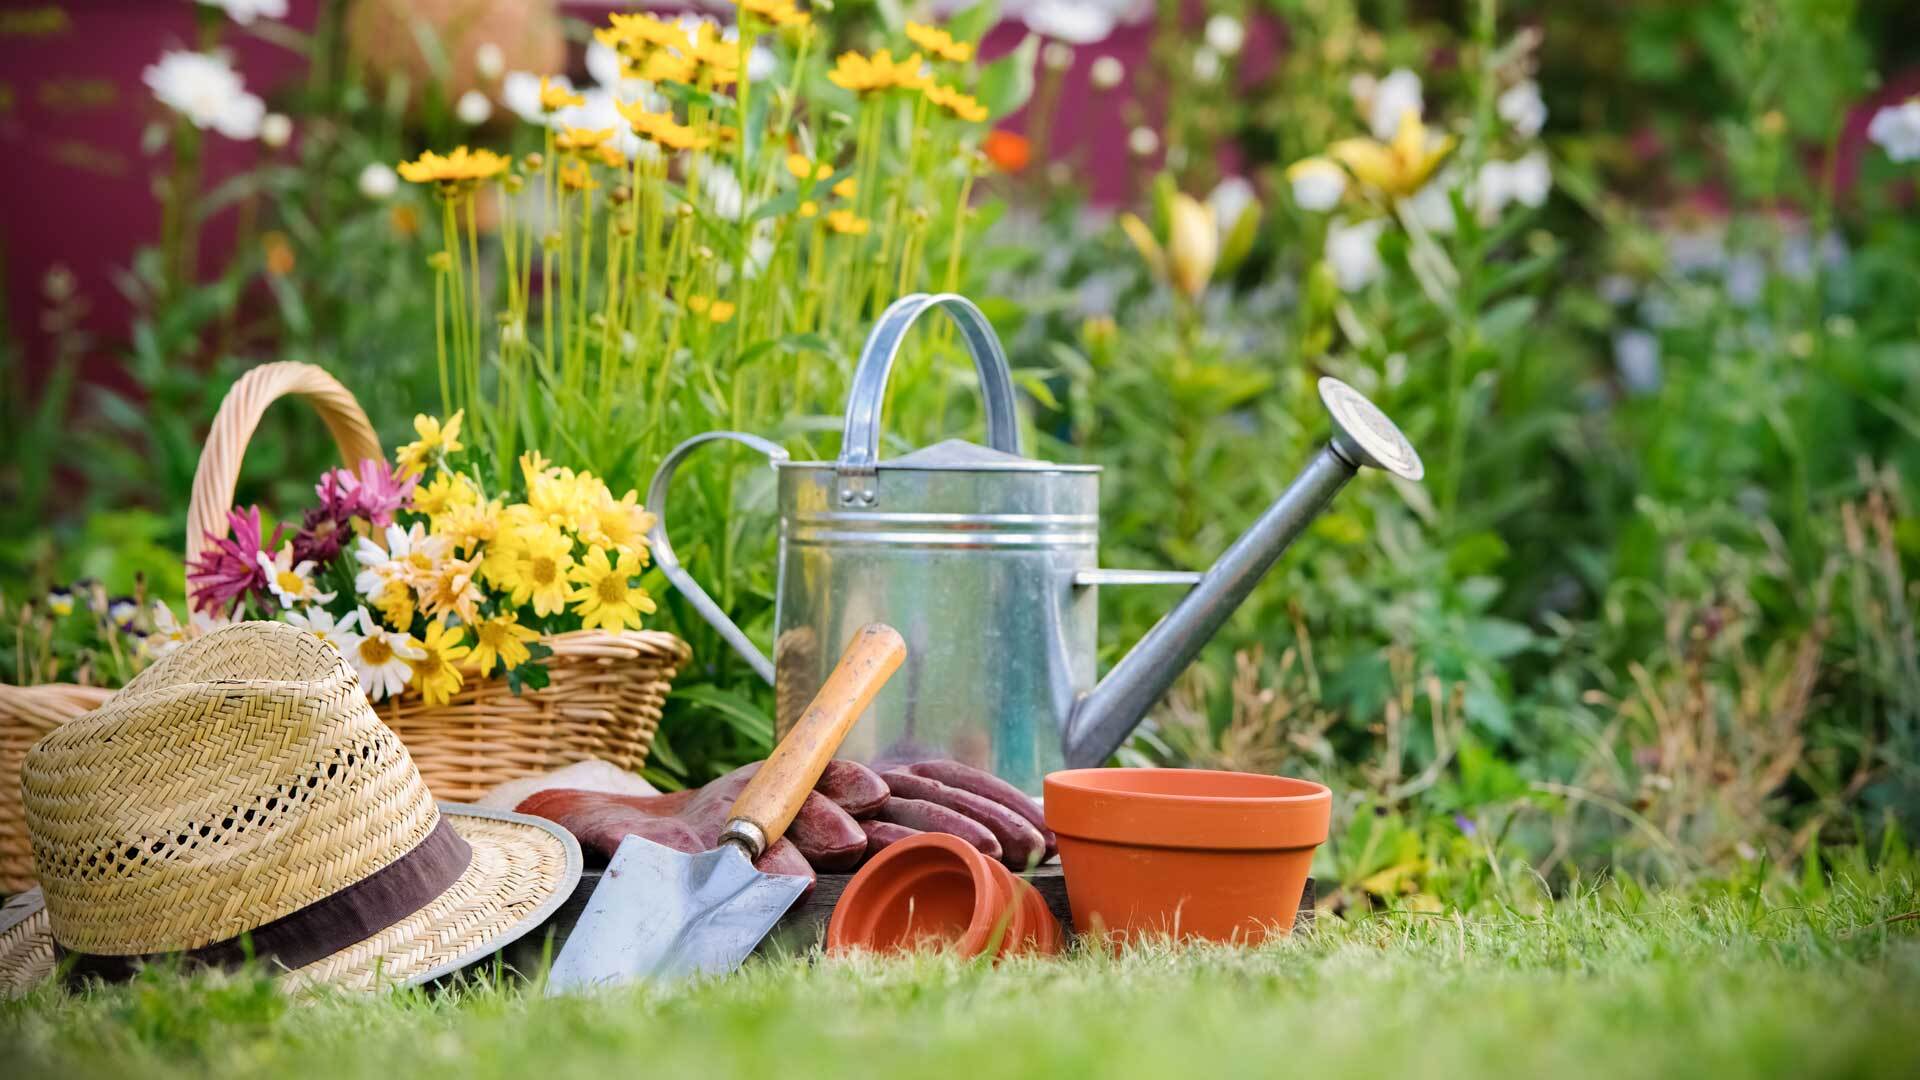 12-facts-about-national-gardening-day-april-14th